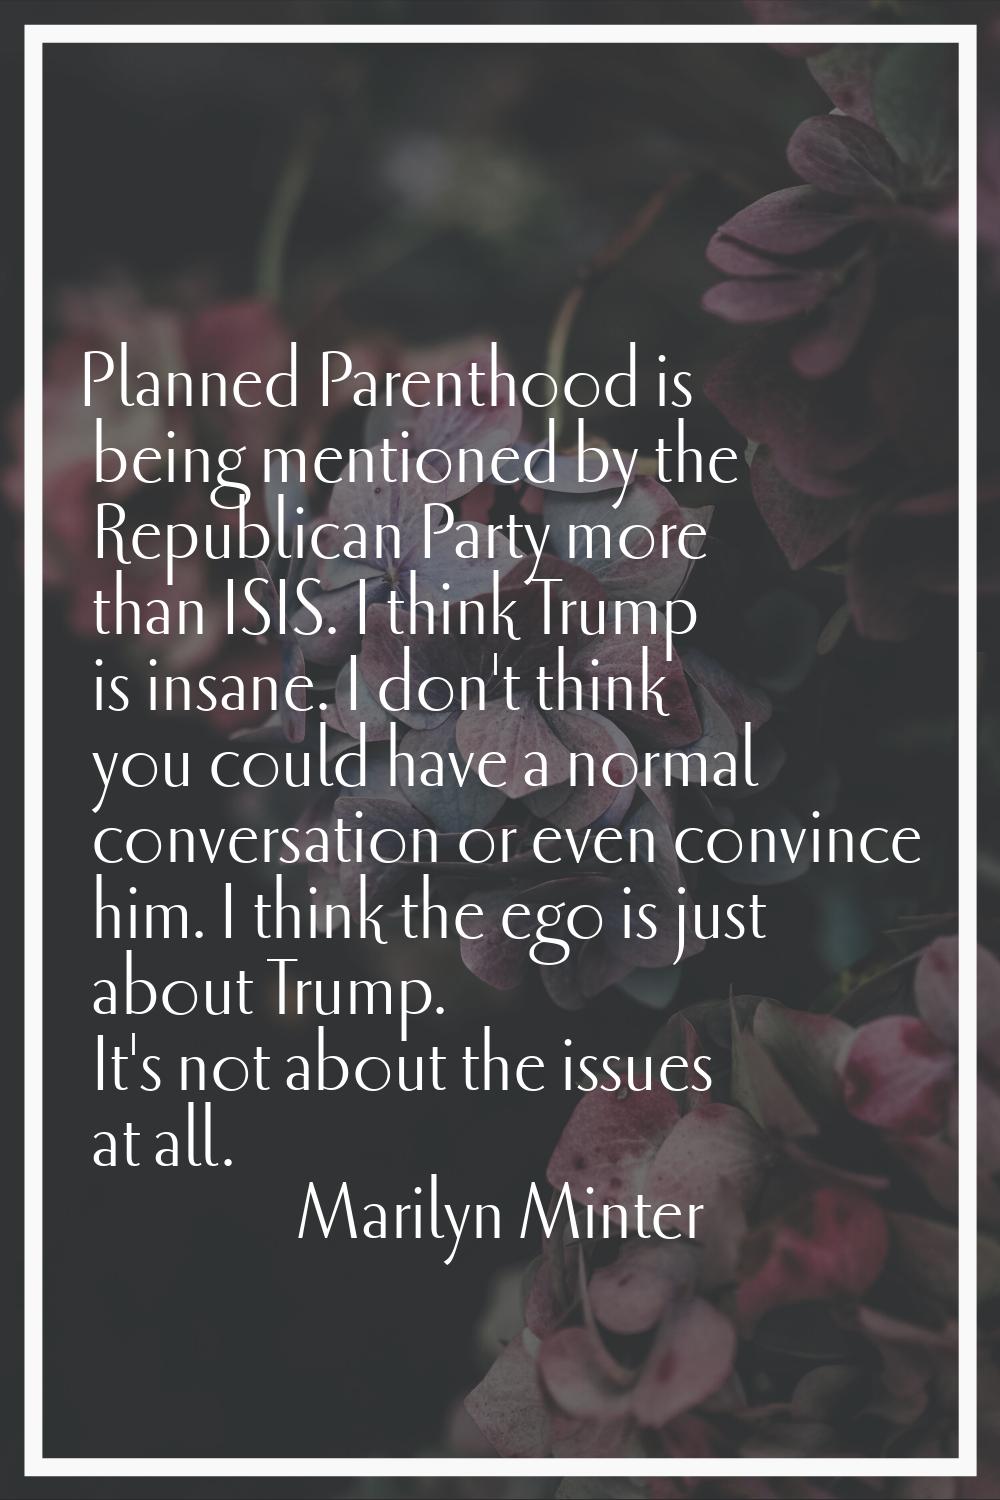 Planned Parenthood is being mentioned by the Republican Party more than ISIS. I think Trump is insa